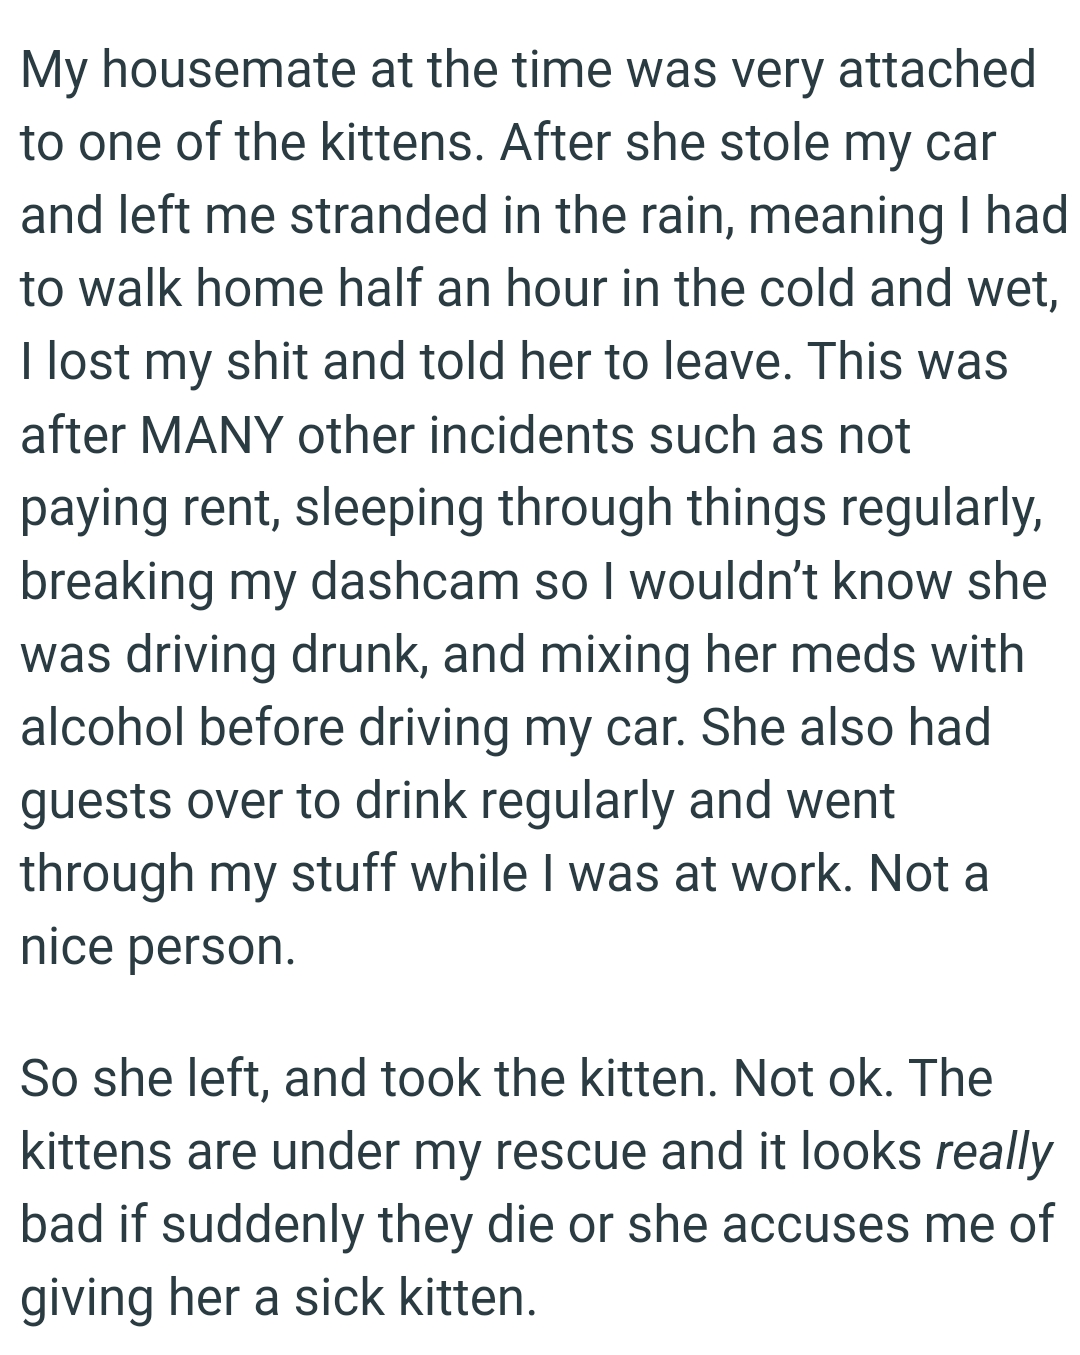 OP's roommate had guests over to drink regularly and went through her stuff while she was at work